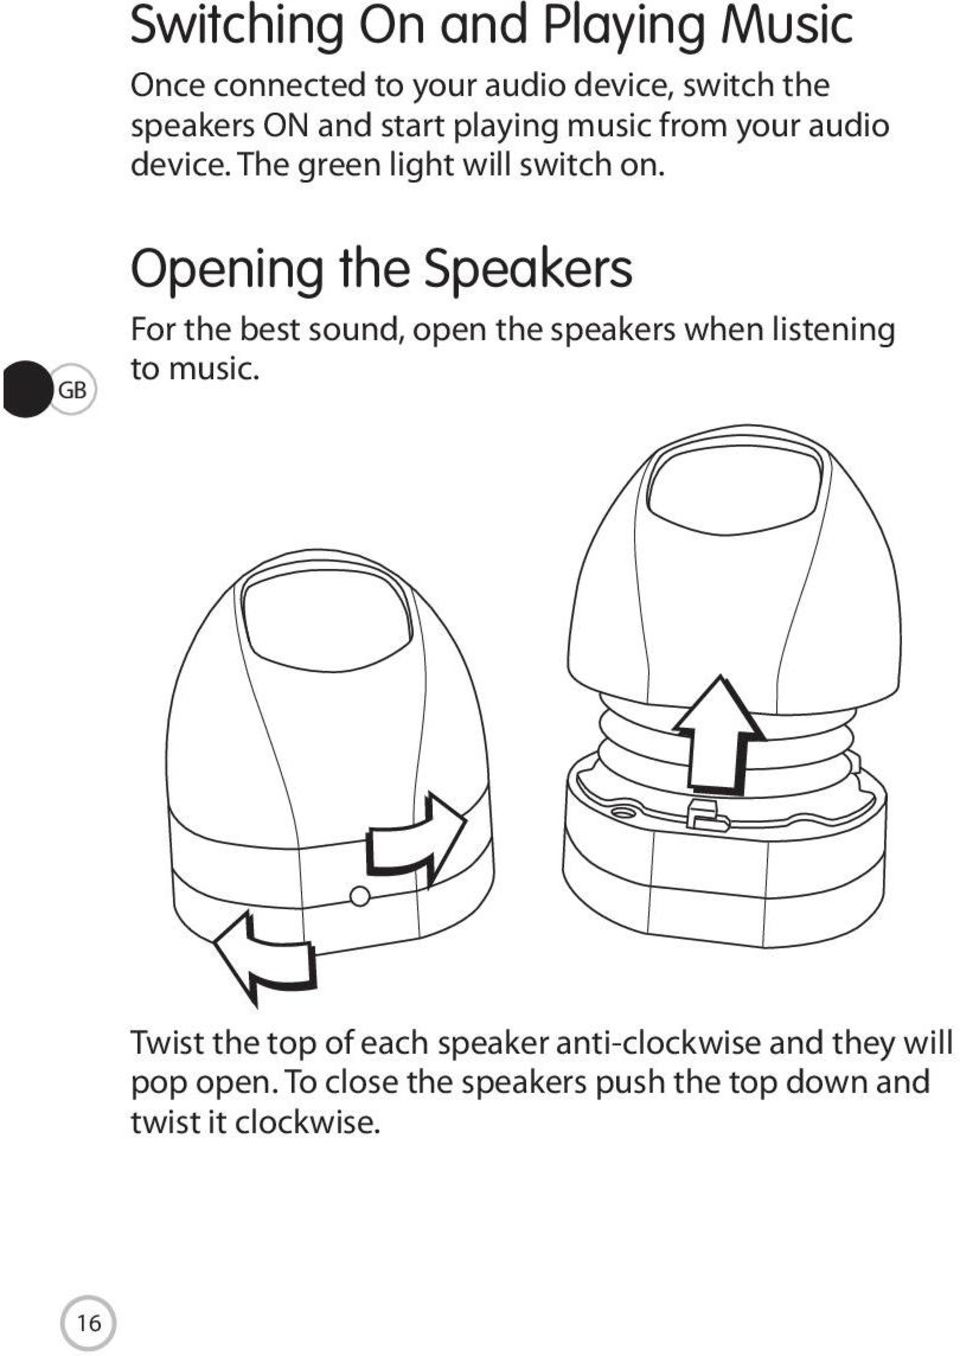 GB Opening the Speakers For the best sound, open the speakers when listening to music.